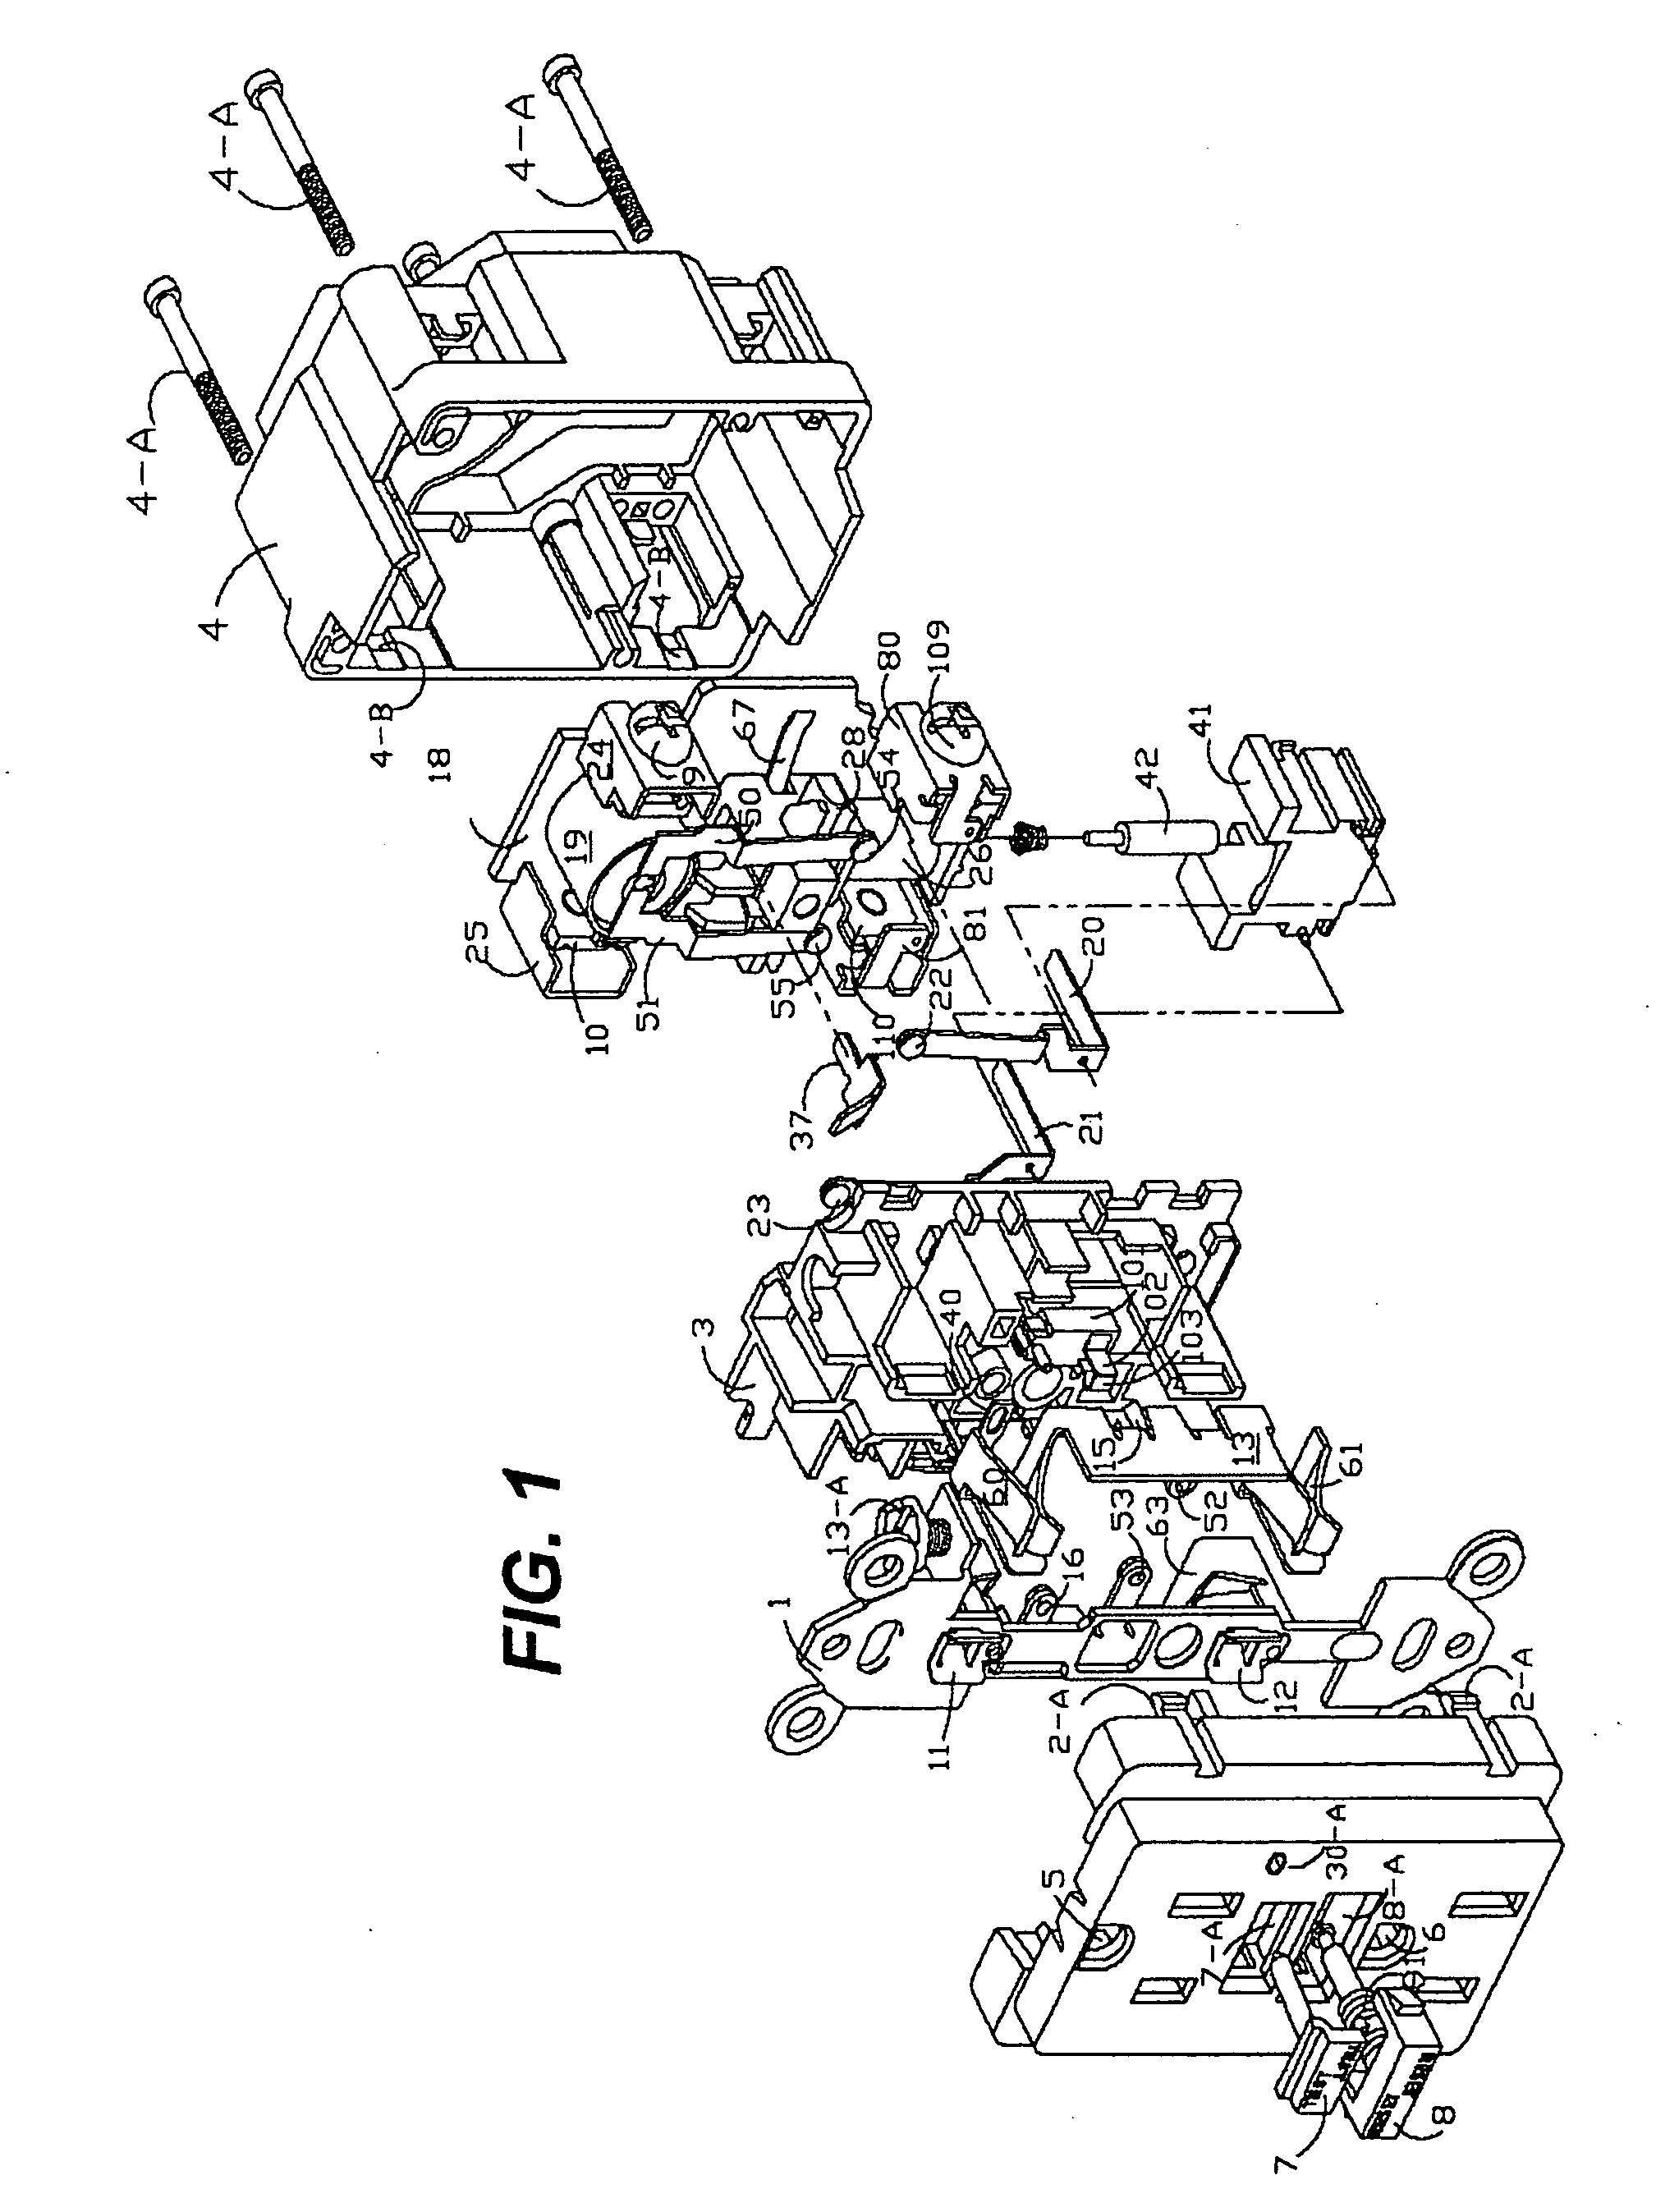 Ground fault circuit interrupter containing a dual-function test button